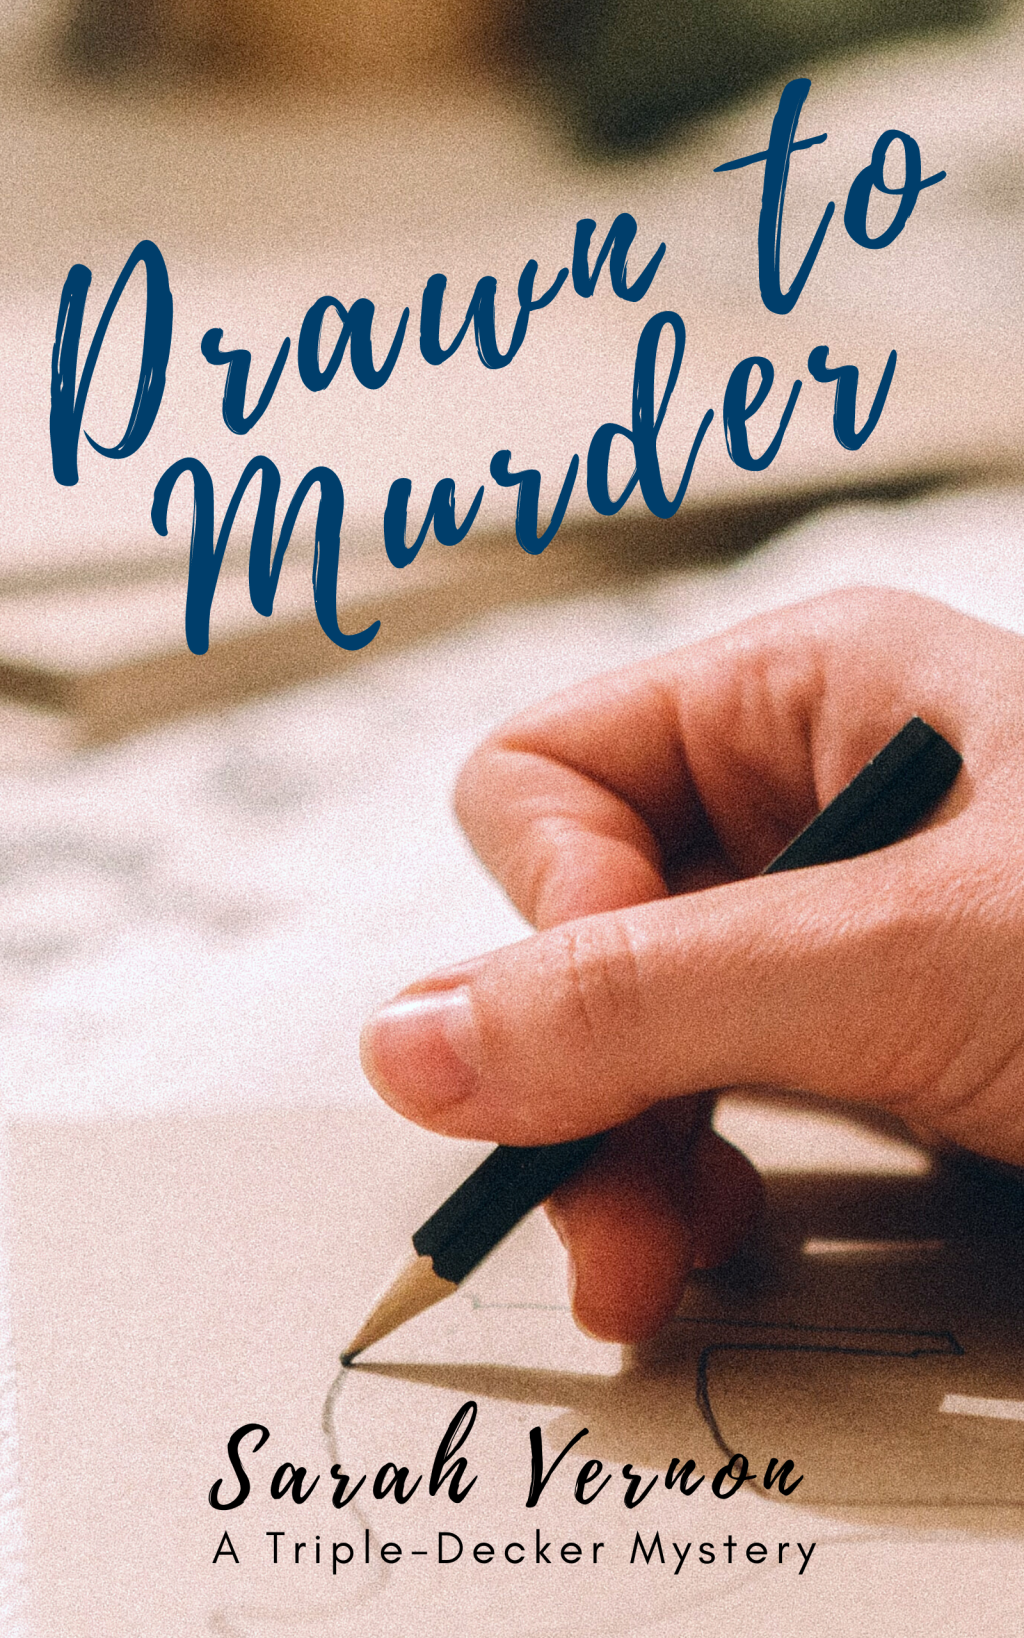 BOOK BLITZ: DRAWN TO MURDER BY SARAH VERNON + GIVEAWAY